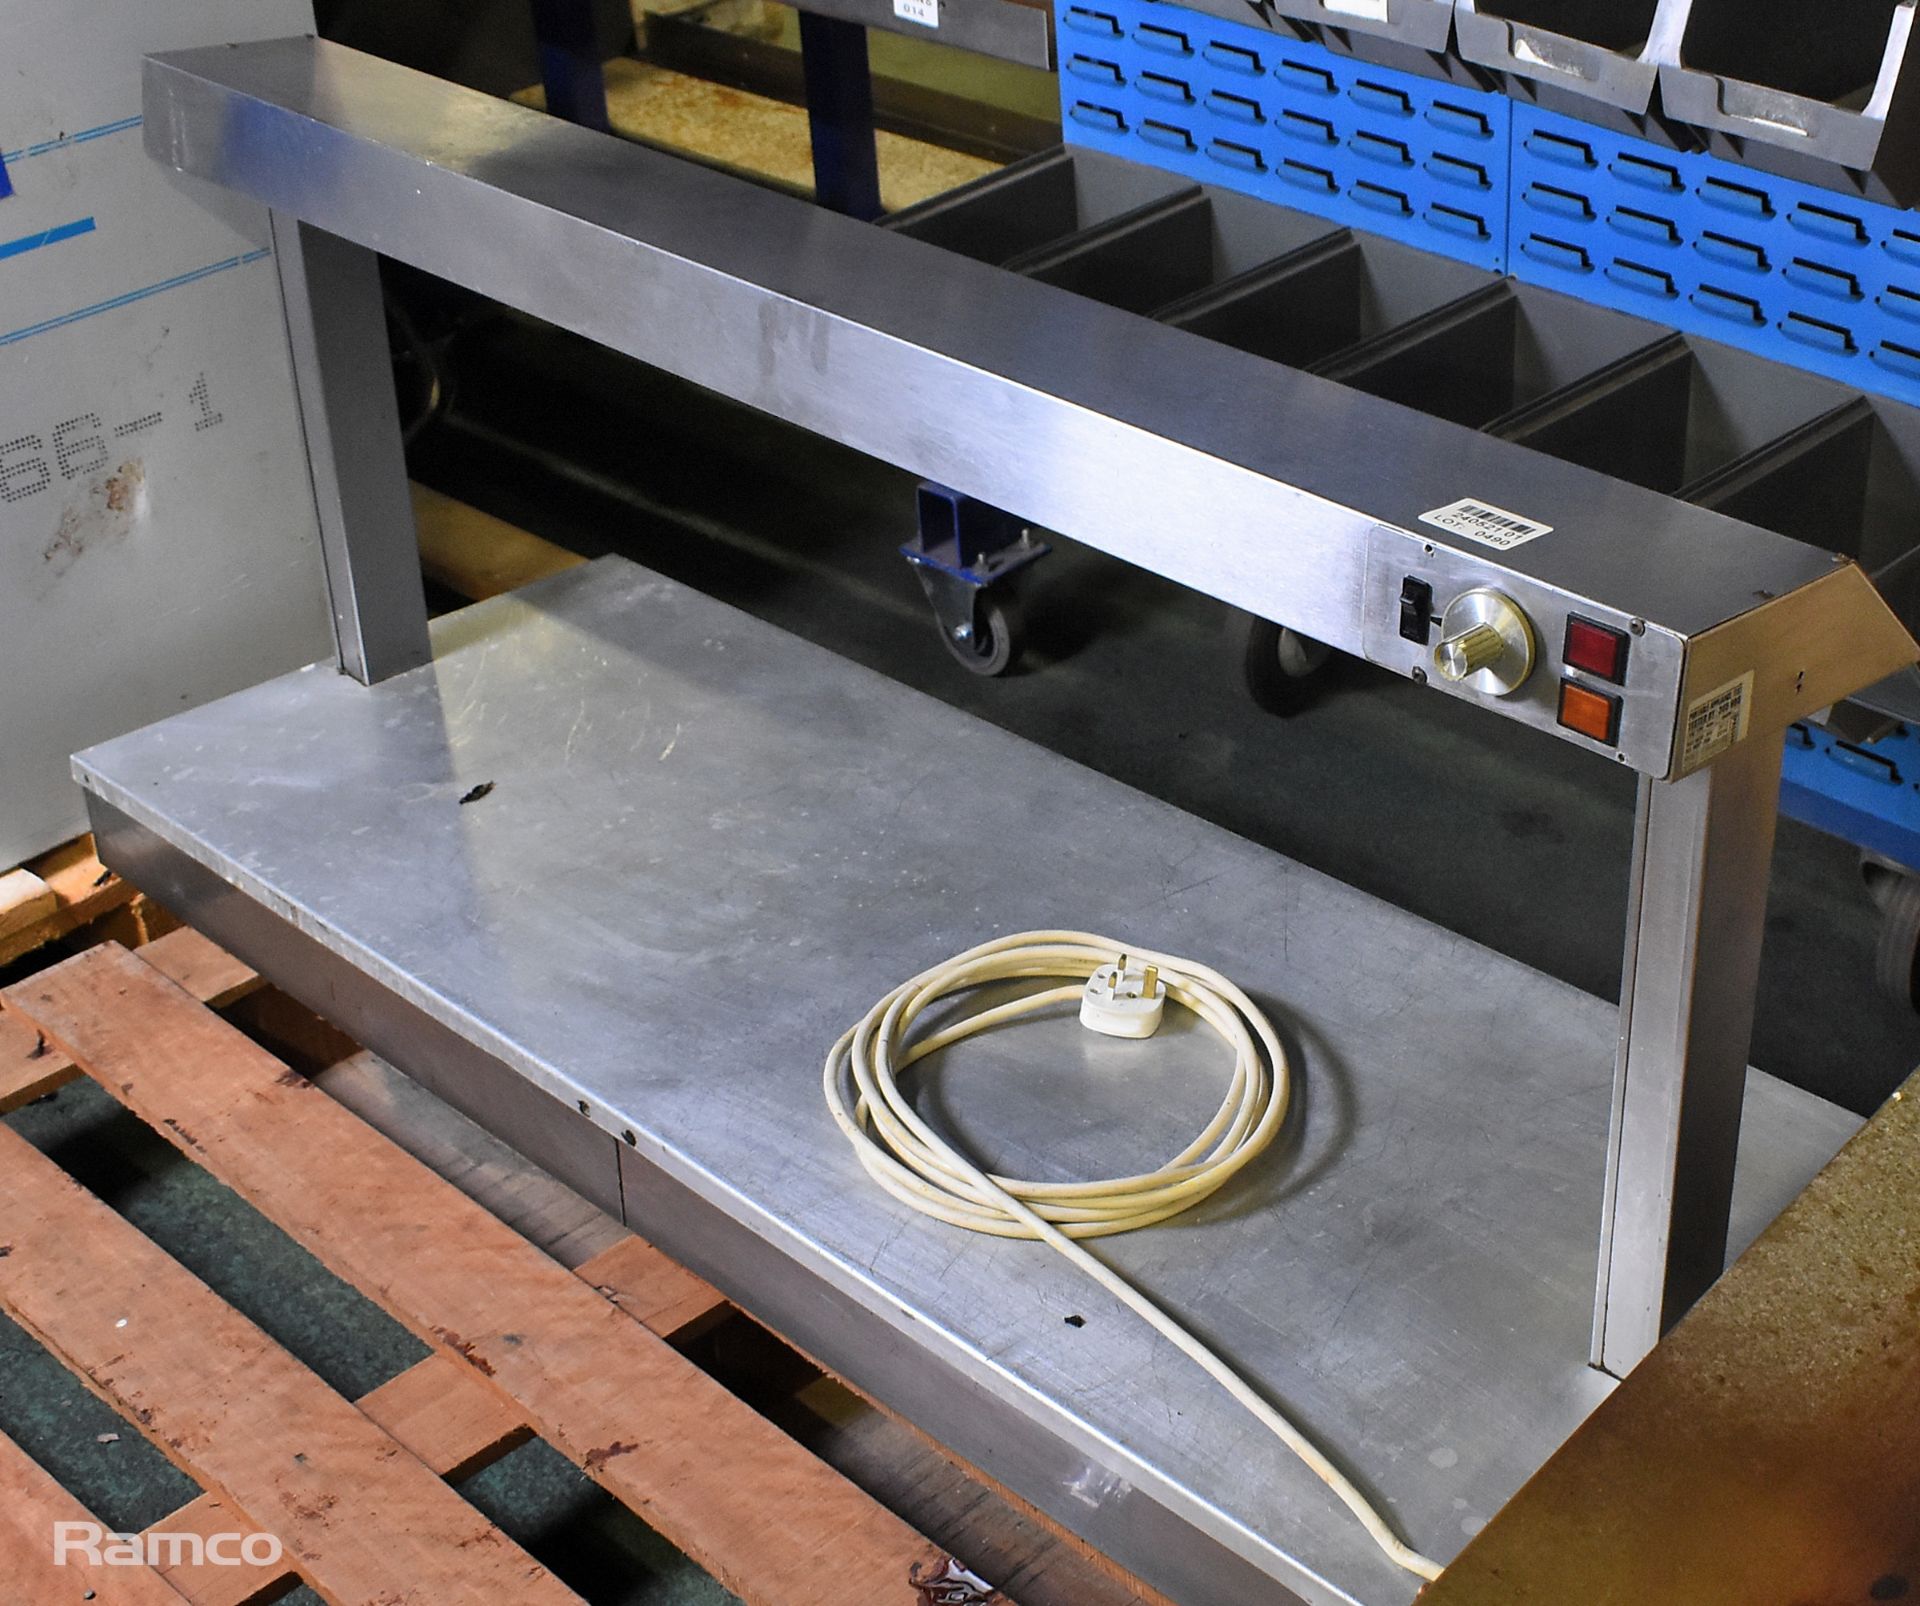 Stainless steel countertop gantry unit - L 1500 x W 500 x D 600mm - Image 2 of 4